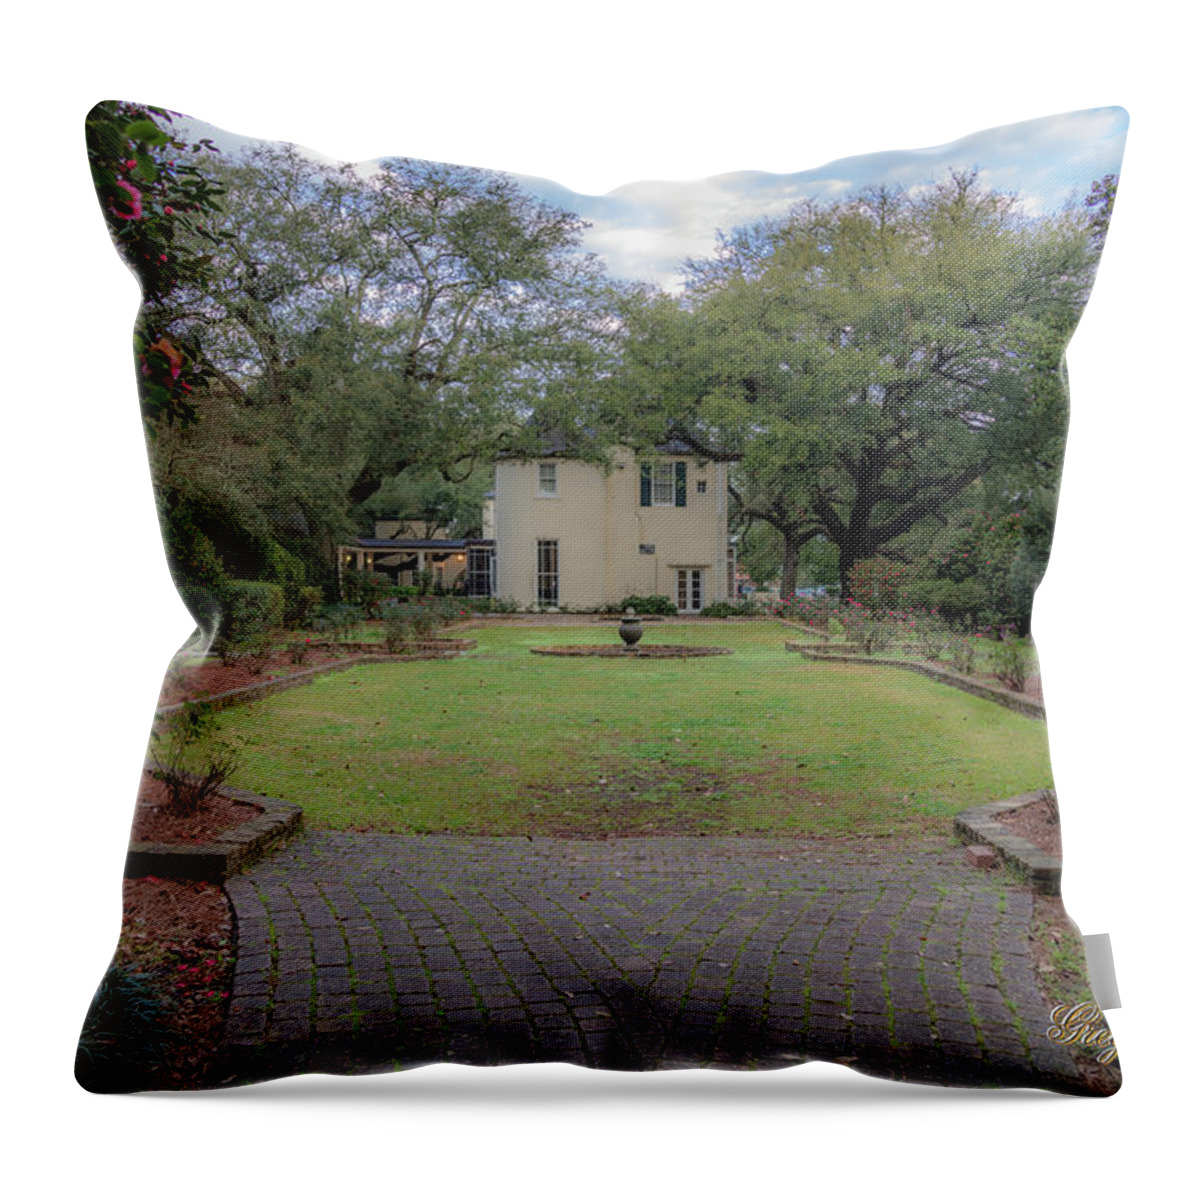 Ul Throw Pillow featuring the photograph Heyman Garden 03 by Gregory Daley MPSA